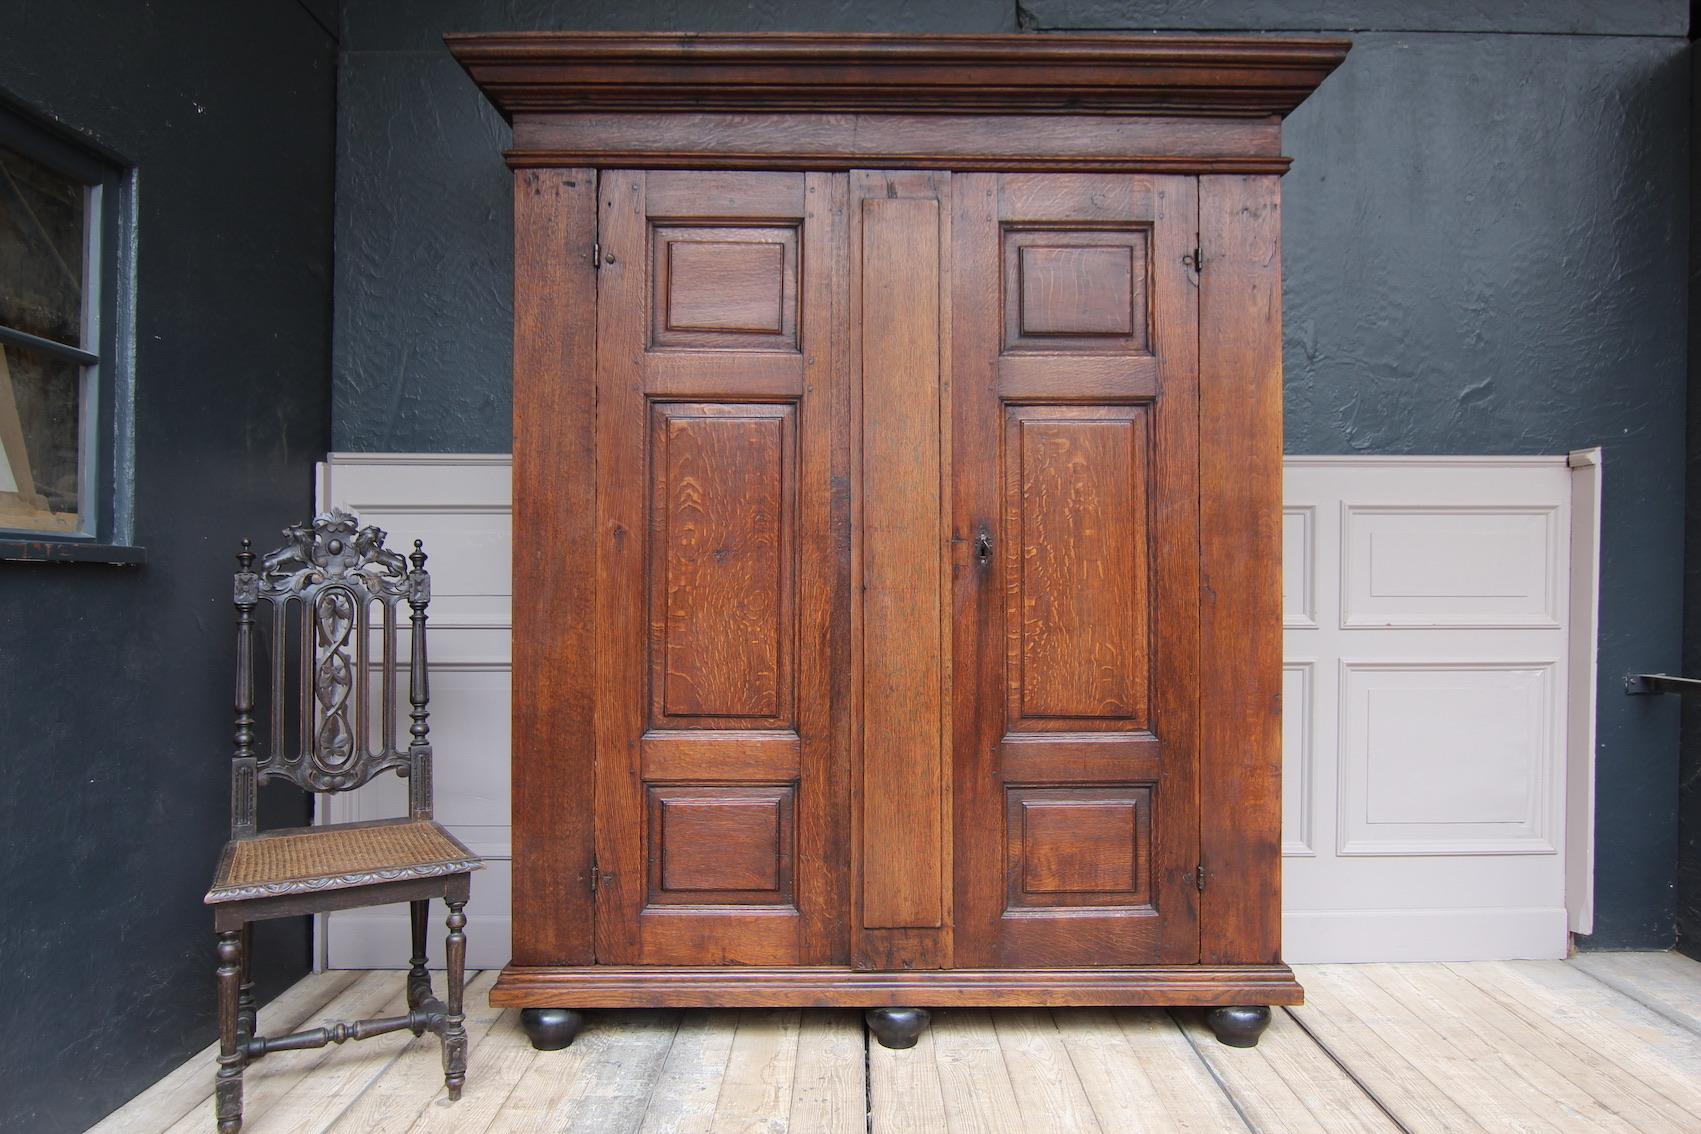 A 18th century cupboard, probably from the Herve region in Belgium.
Straight, 2-door oak body standing on ebonized ball feet. Both doors and side panels are made with panels. Multi-profiled header.

Equipped with 3 shelves inside. Of course,